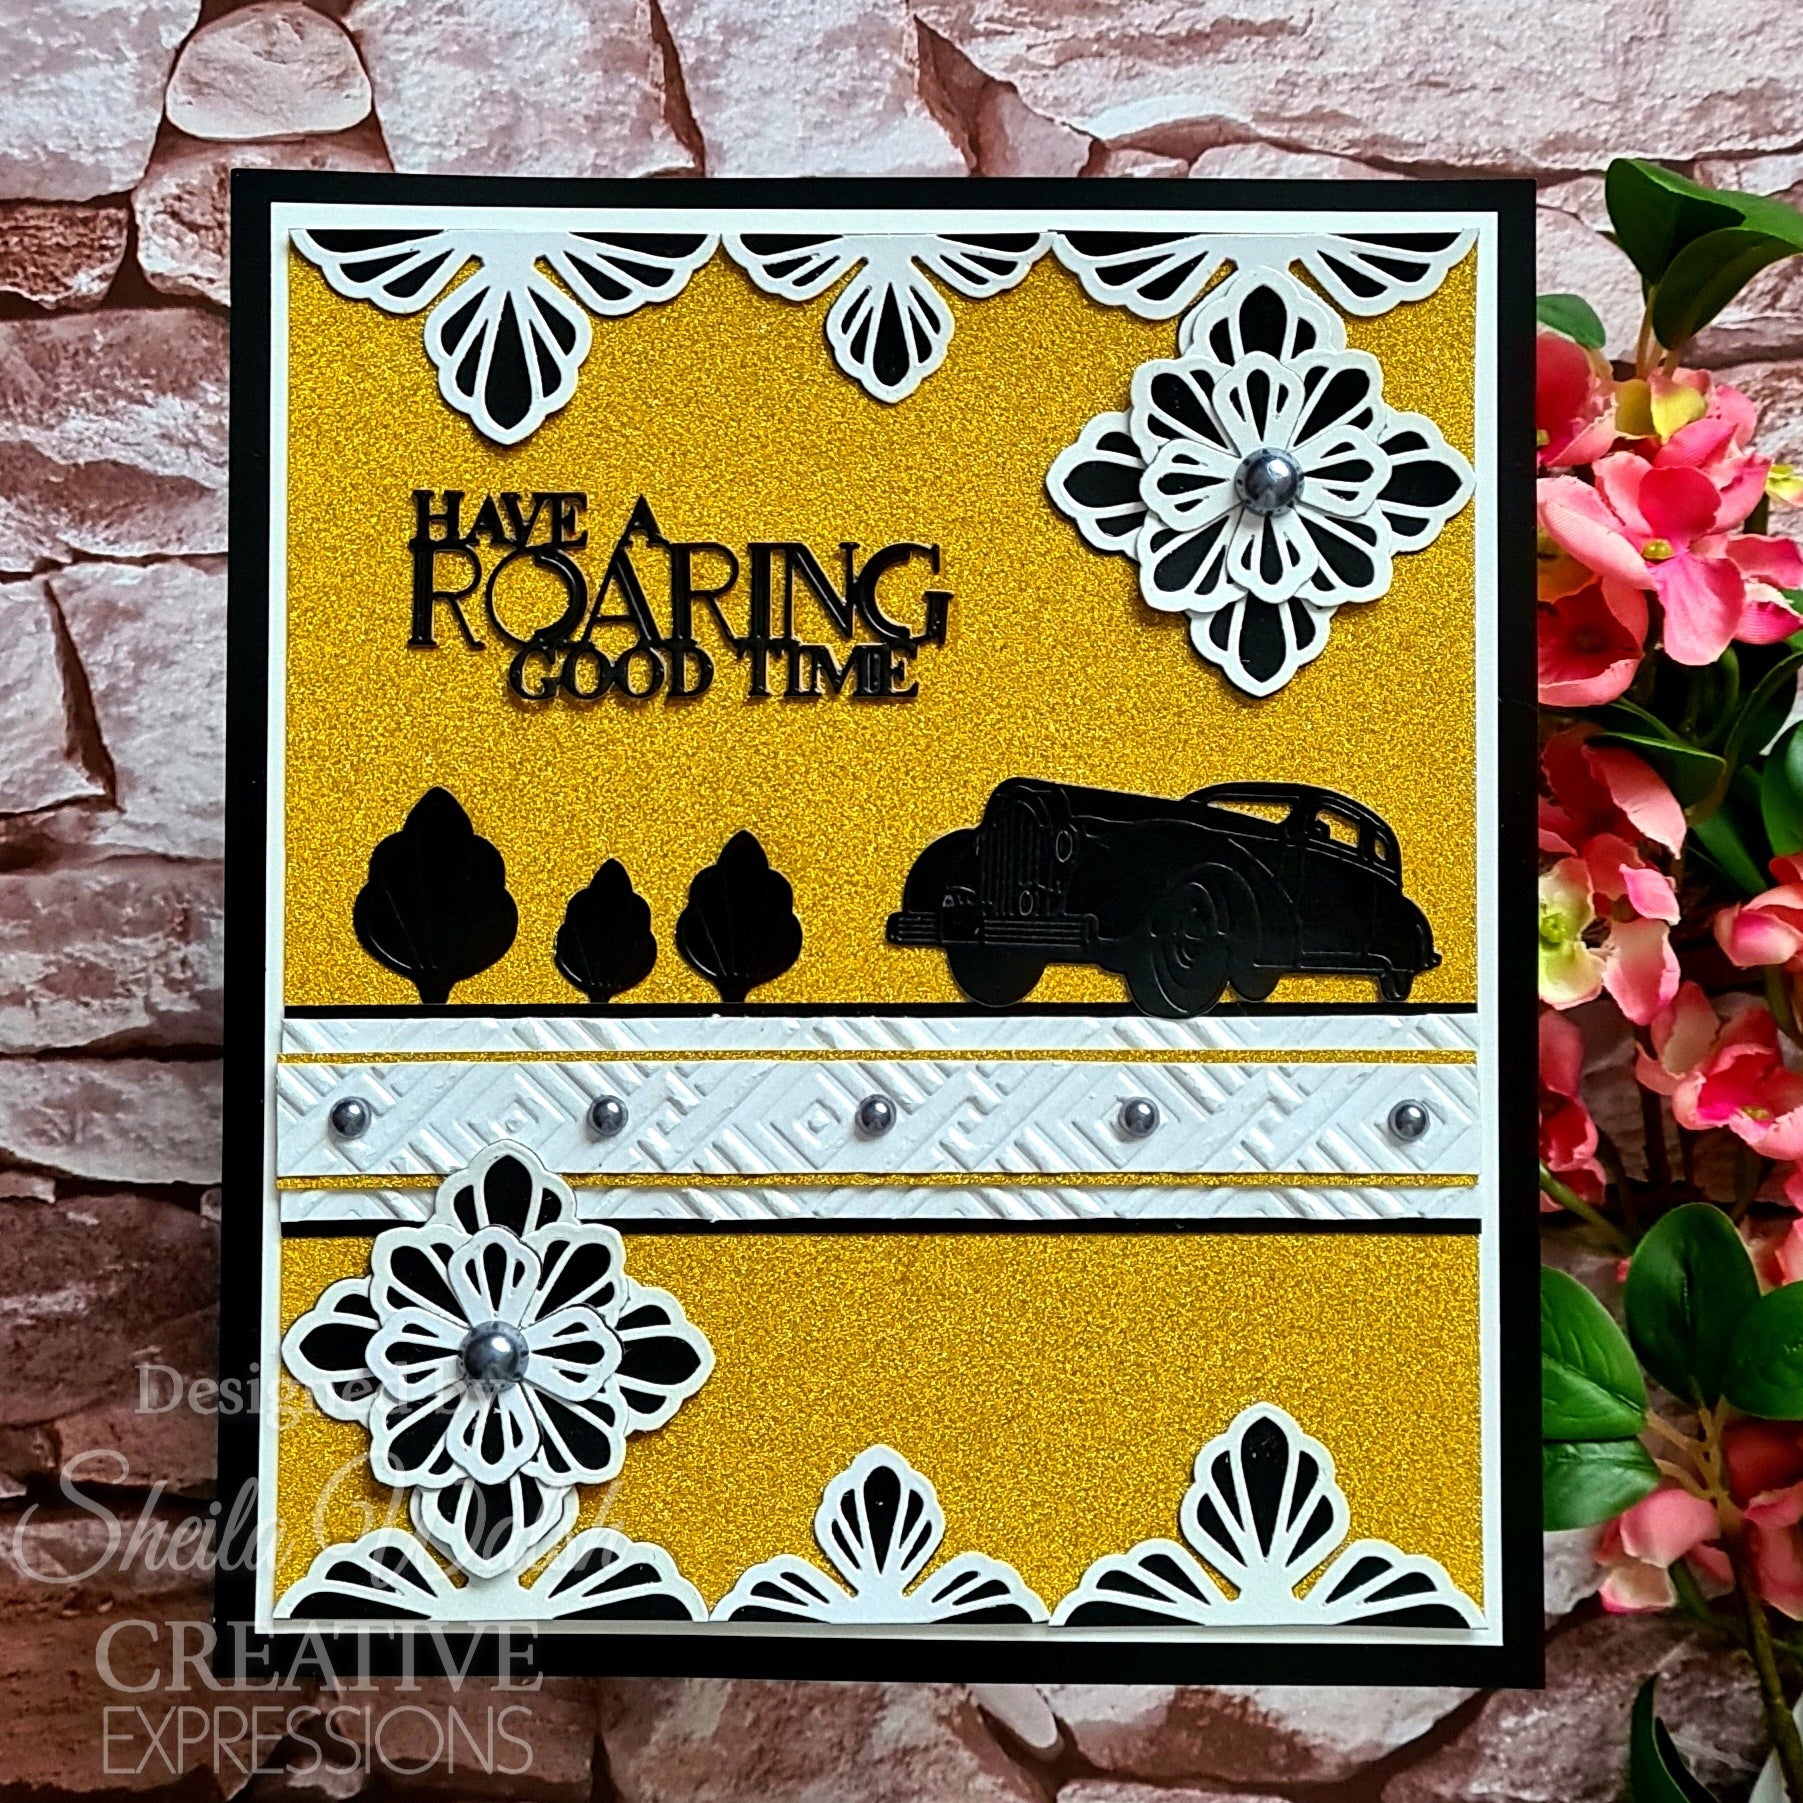 Creative Expressions Sue Wilson Mini Expressions Art Deco Have A Roaring Good Time Craft Die